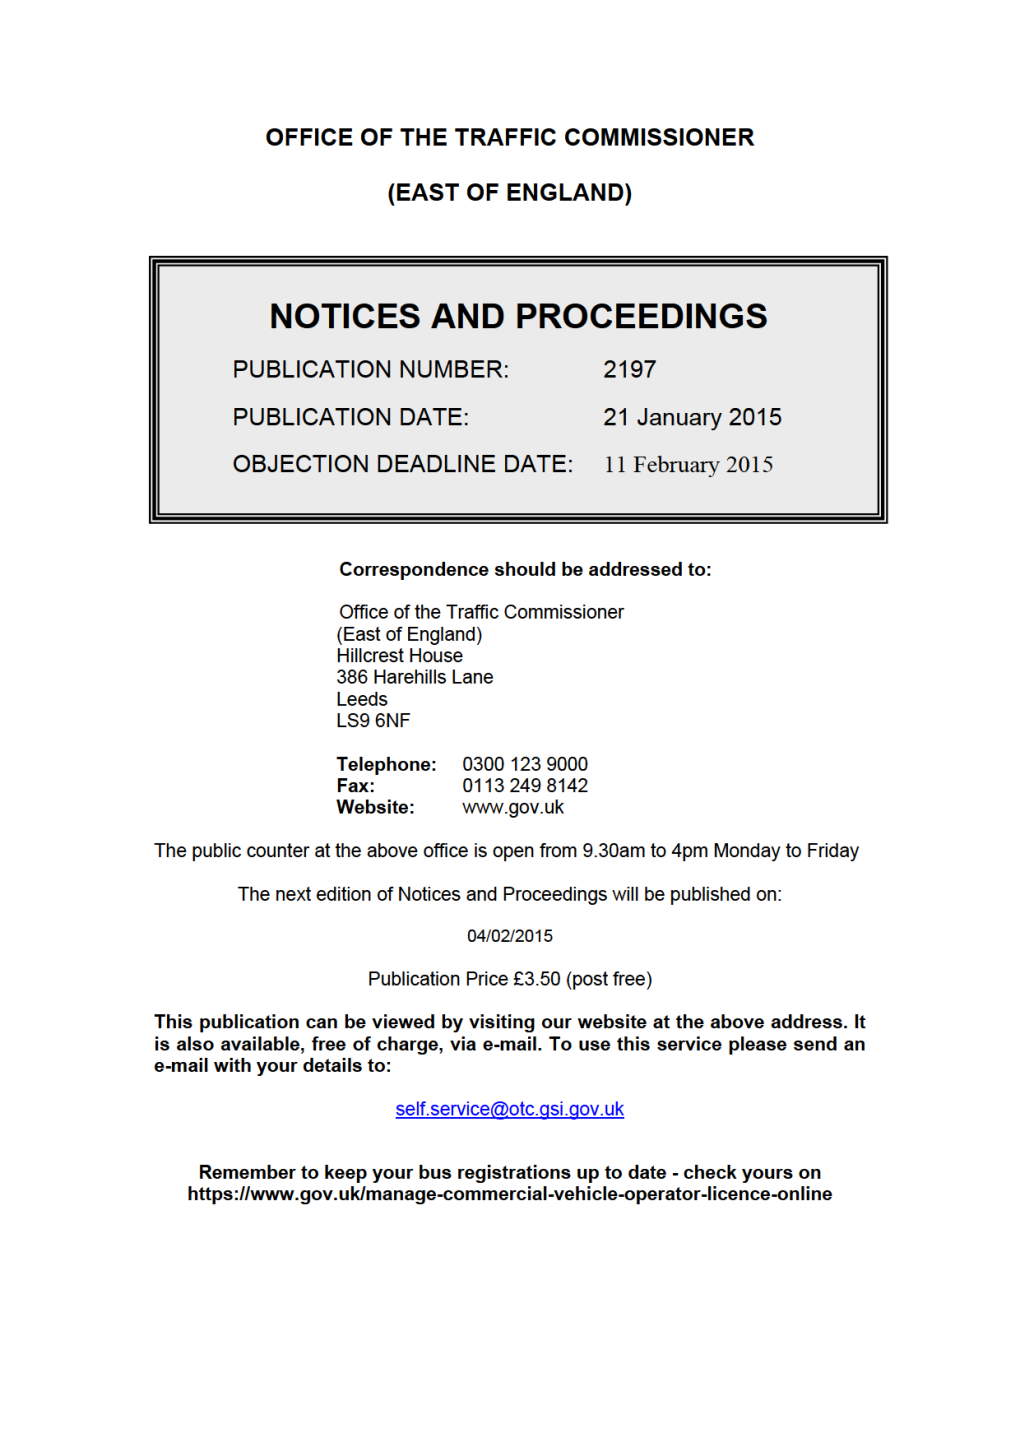 NOTICES and PROCEEDINGS 21 January 2015